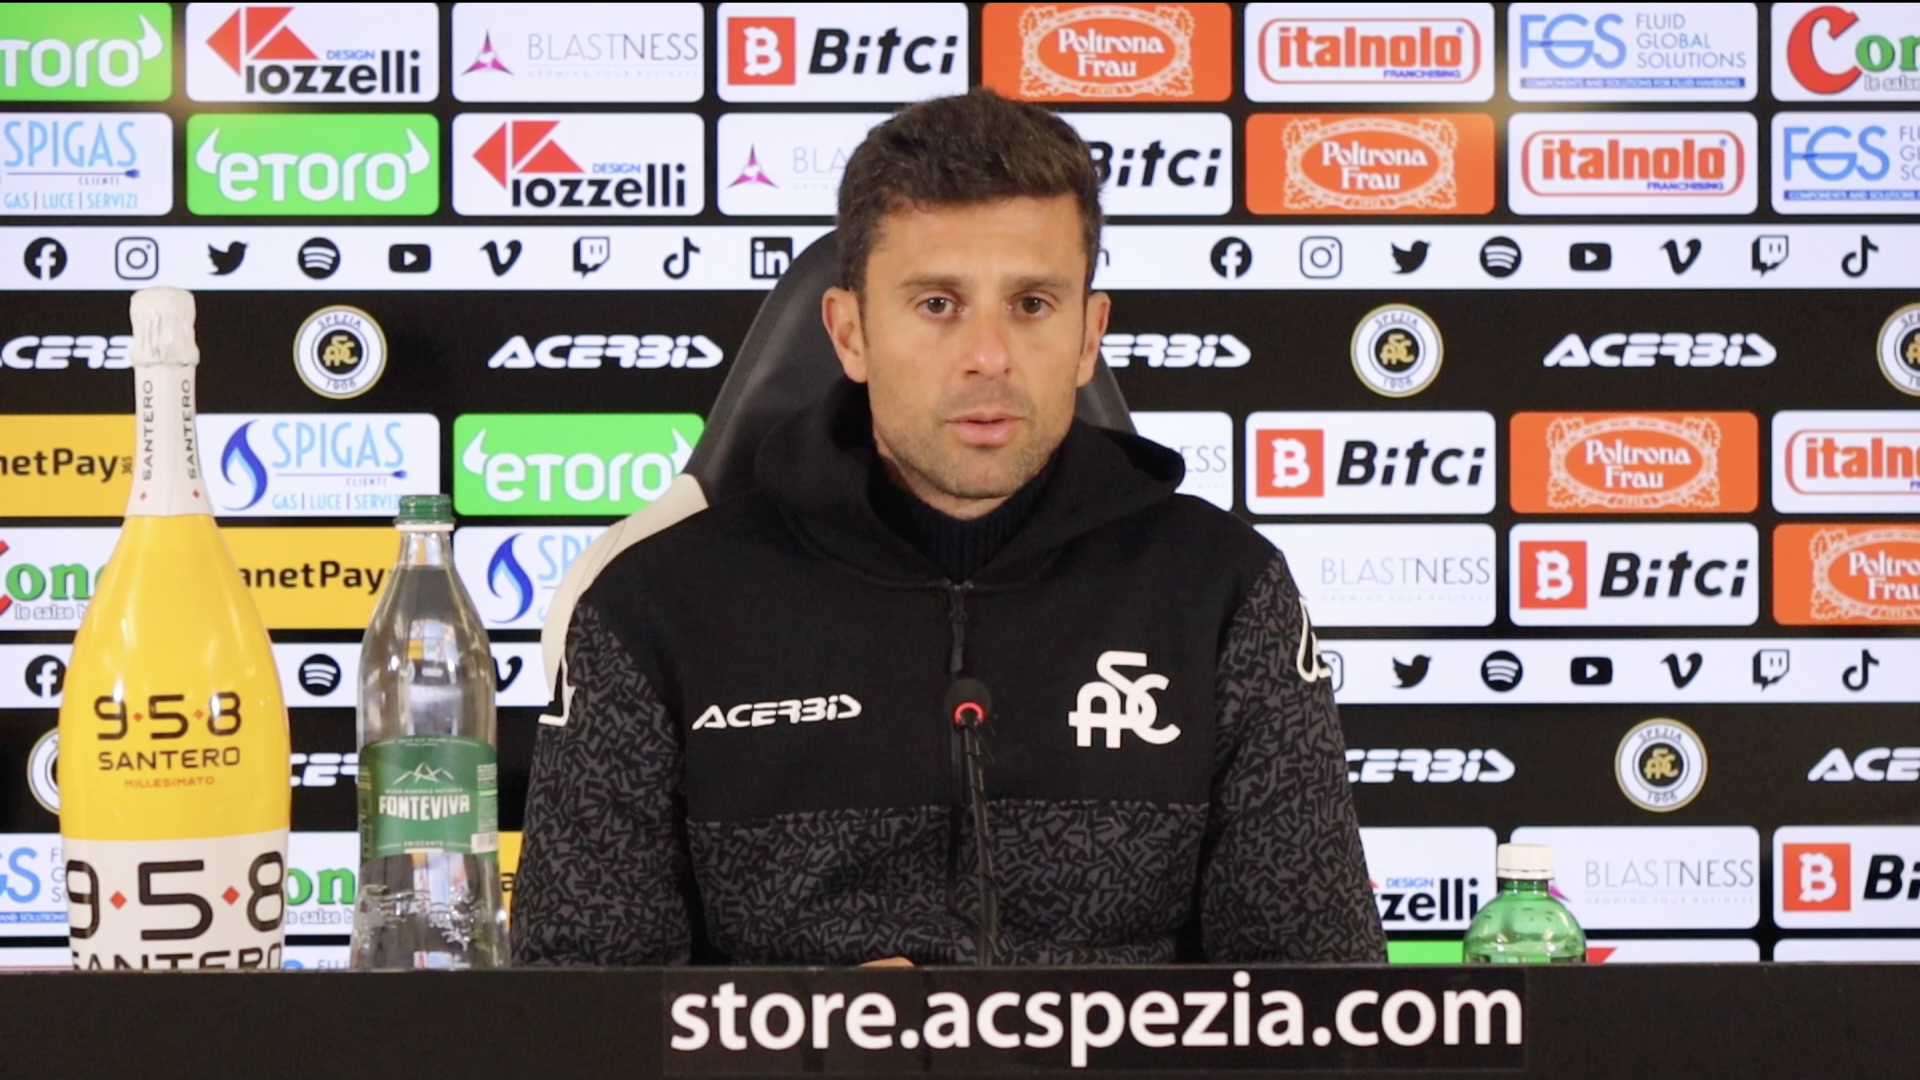 Thiago Motta: “We want to win for us and for our fans“